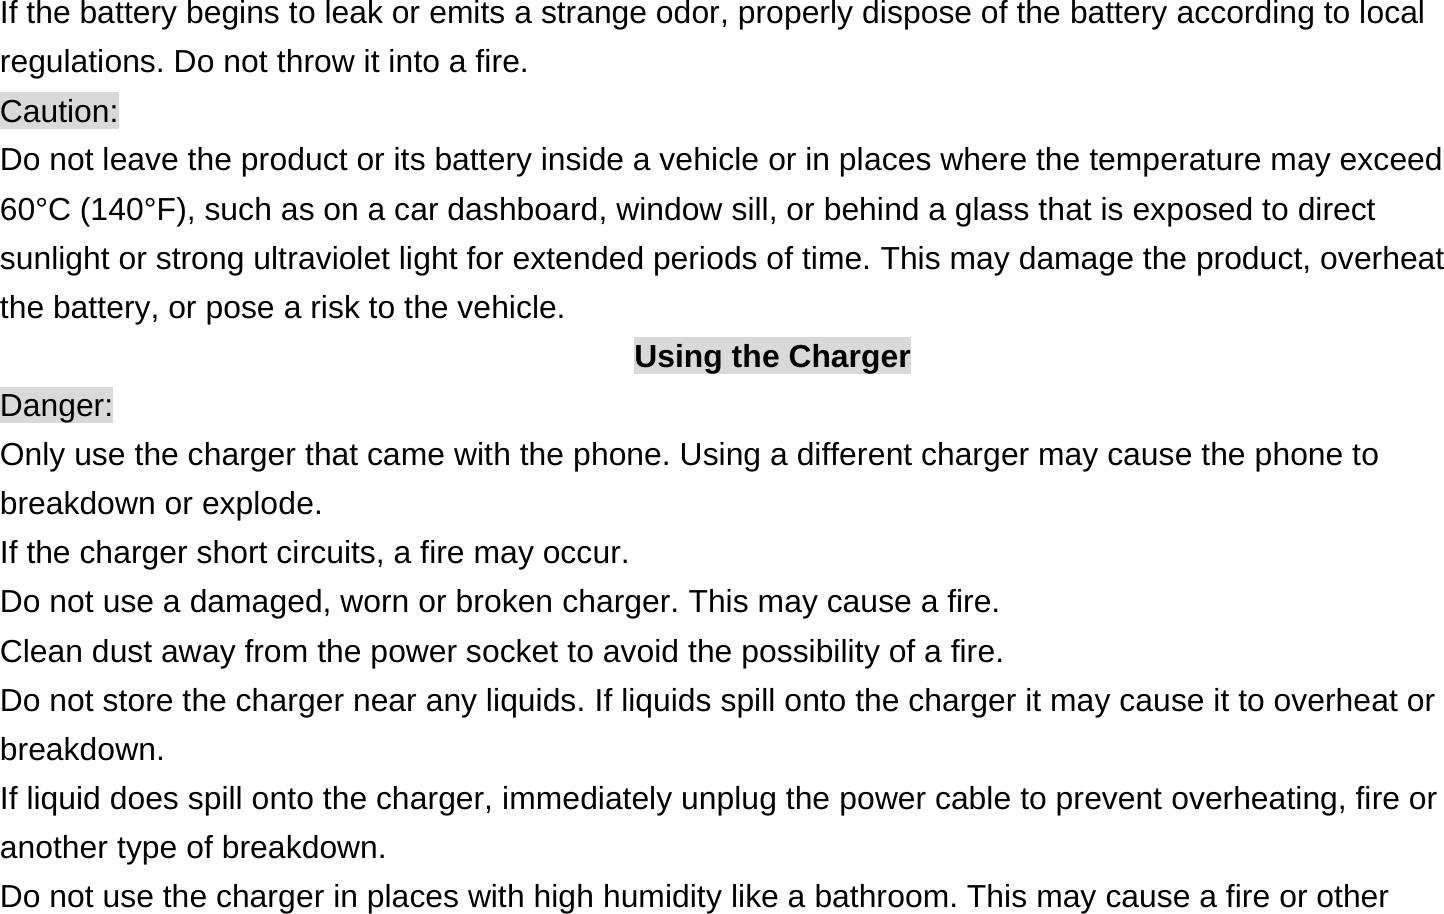  If the battery begins to leak or emits a strange odor, properly dispose of the battery according to local regulations. Do not throw it into a fire.   Caution: Do not leave the product or its battery inside a vehicle or in places where the temperature may exceed 60°C (140°F), such as on a car dashboard, window sill, or behind a glass that is exposed to direct sunlight or strong ultraviolet light for extended periods of time. This may damage the product, overheat the battery, or pose a risk to the vehicle.   Using the Charger Danger: Only use the charger that came with the phone. Using a different charger may cause the phone to breakdown or explode.   If the charger short circuits, a fire may occur.   Do not use a damaged, worn or broken charger. This may cause a fire.   Clean dust away from the power socket to avoid the possibility of a fire. Do not store the charger near any liquids. If liquids spill onto the charger it may cause it to overheat or breakdown. If liquid does spill onto the charger, immediately unplug the power cable to prevent overheating, fire or another type of breakdown. Do not use the charger in places with high humidity like a bathroom. This may cause a fire or other 